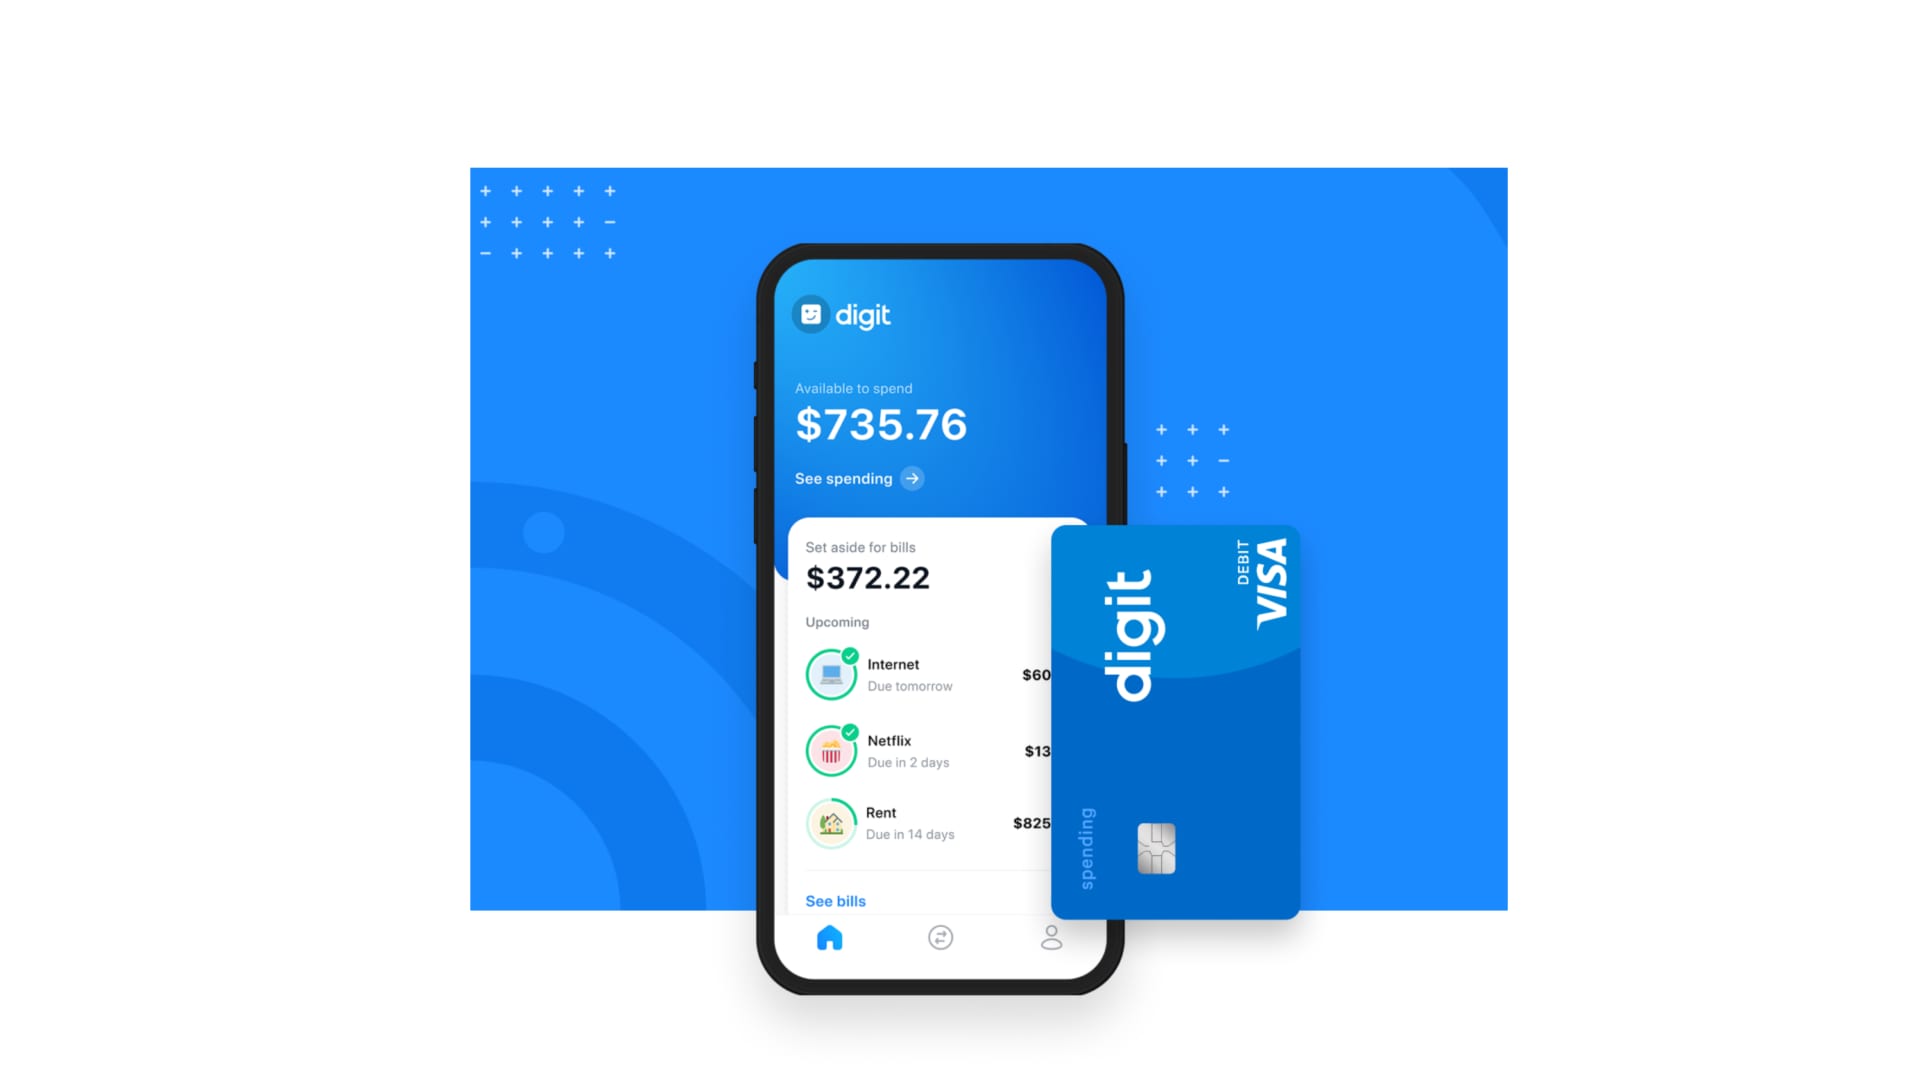 Digit Direct provides users with spending, savings and bill accounts.